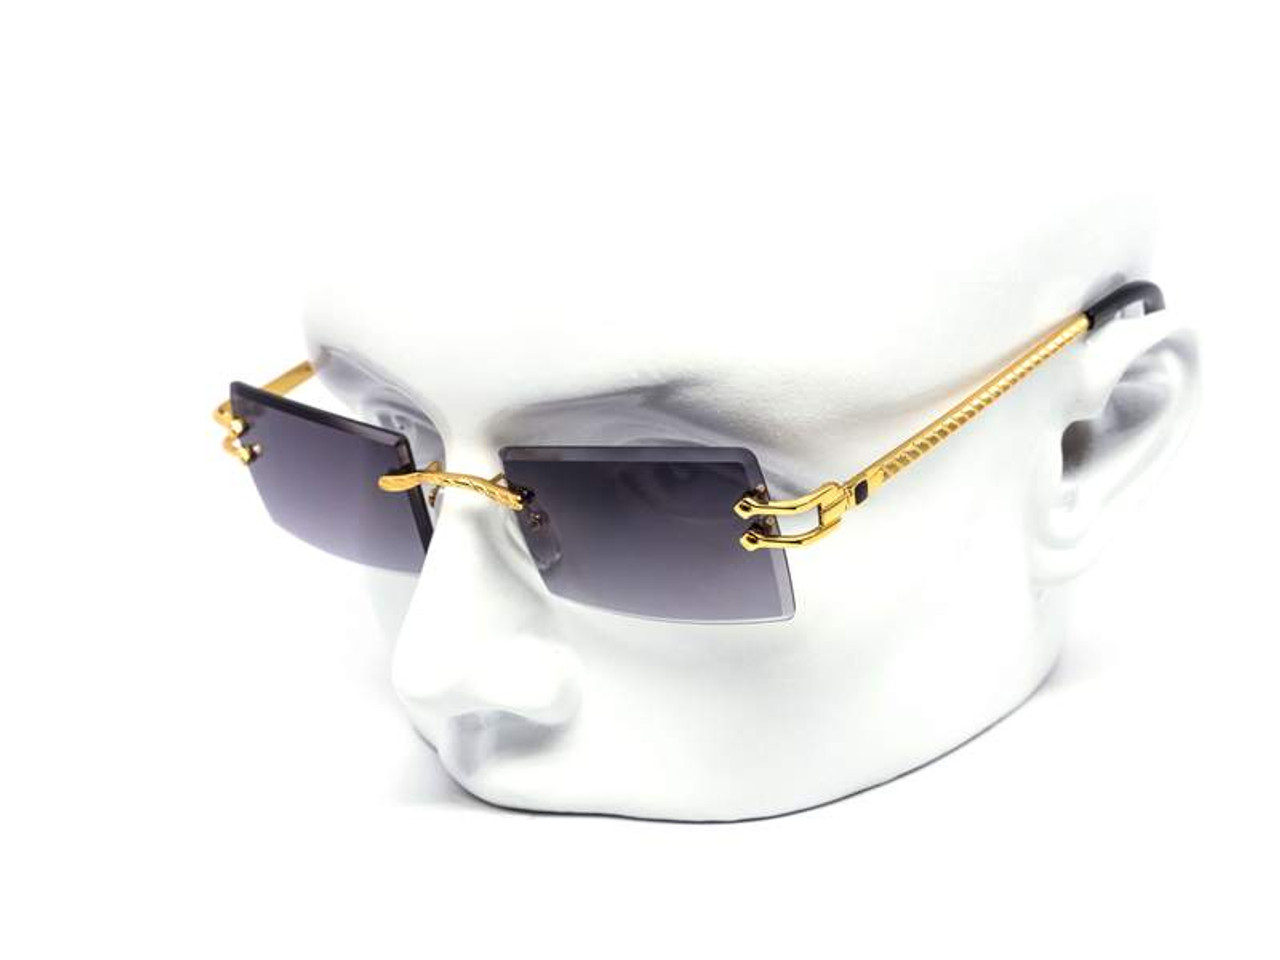 WOOD BUFFS SUNGLASSES GLASSES SILVER METAL FRAME AWESOME LOOKING STYLE SUNNIES 